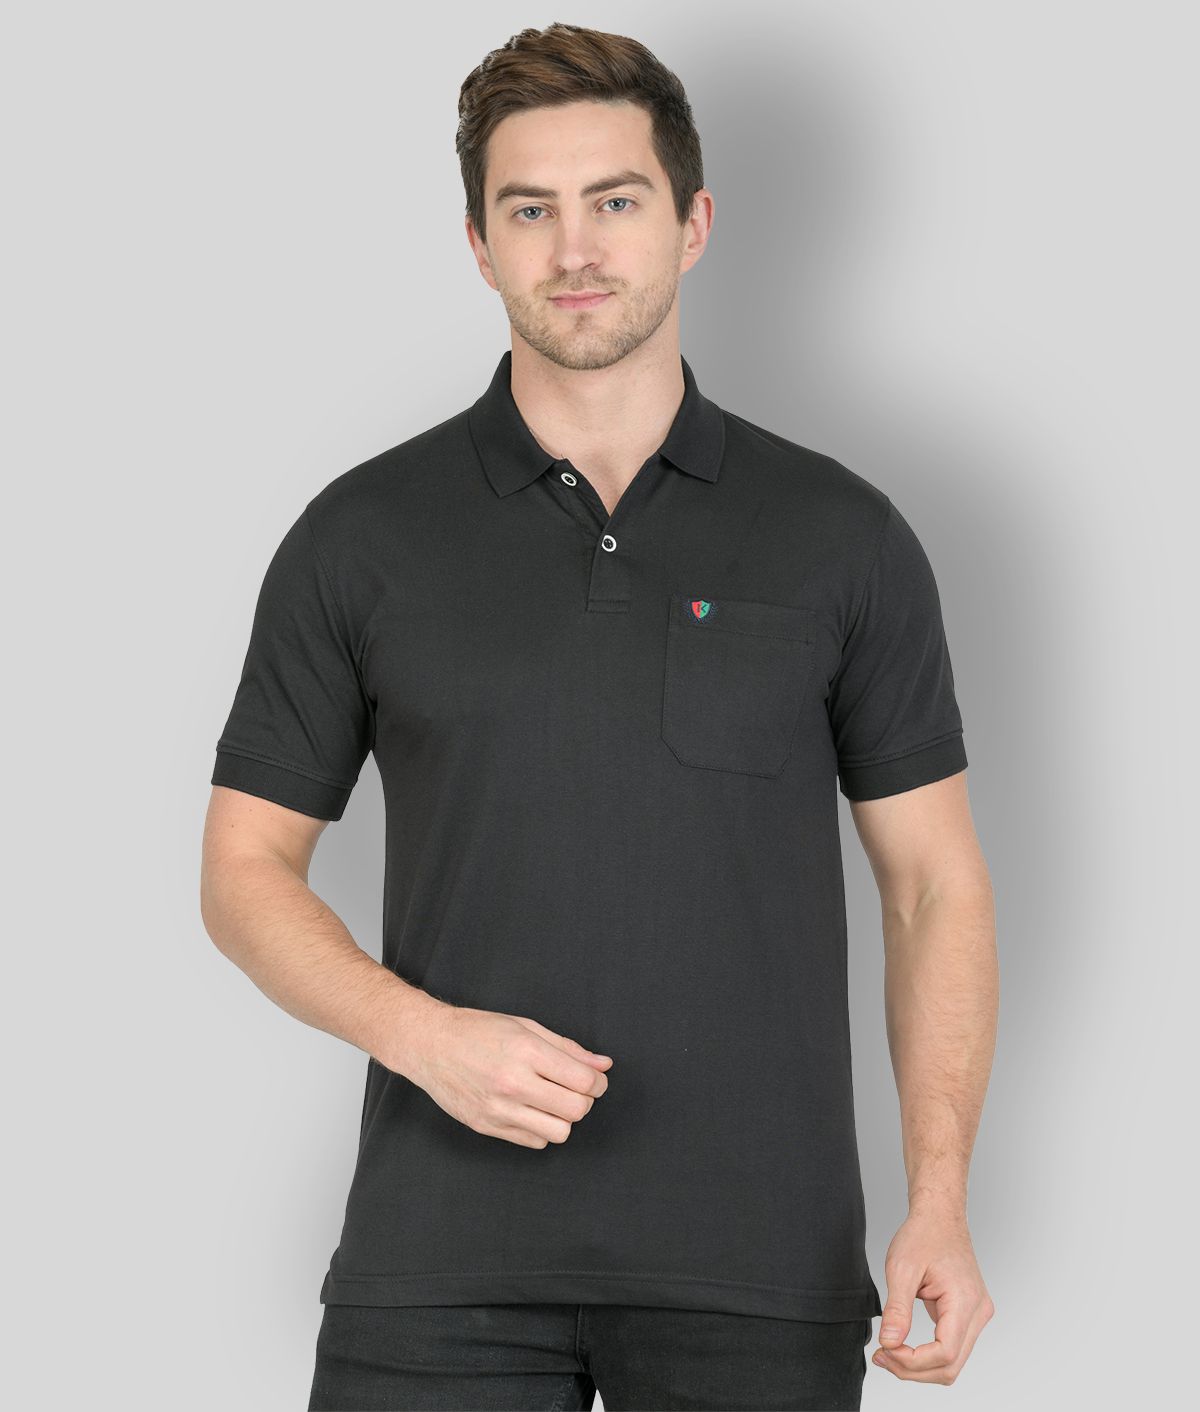     			Kaily - Black Cotton Blend Slim Fit Men's Polo T Shirt ( Pack of 1 )